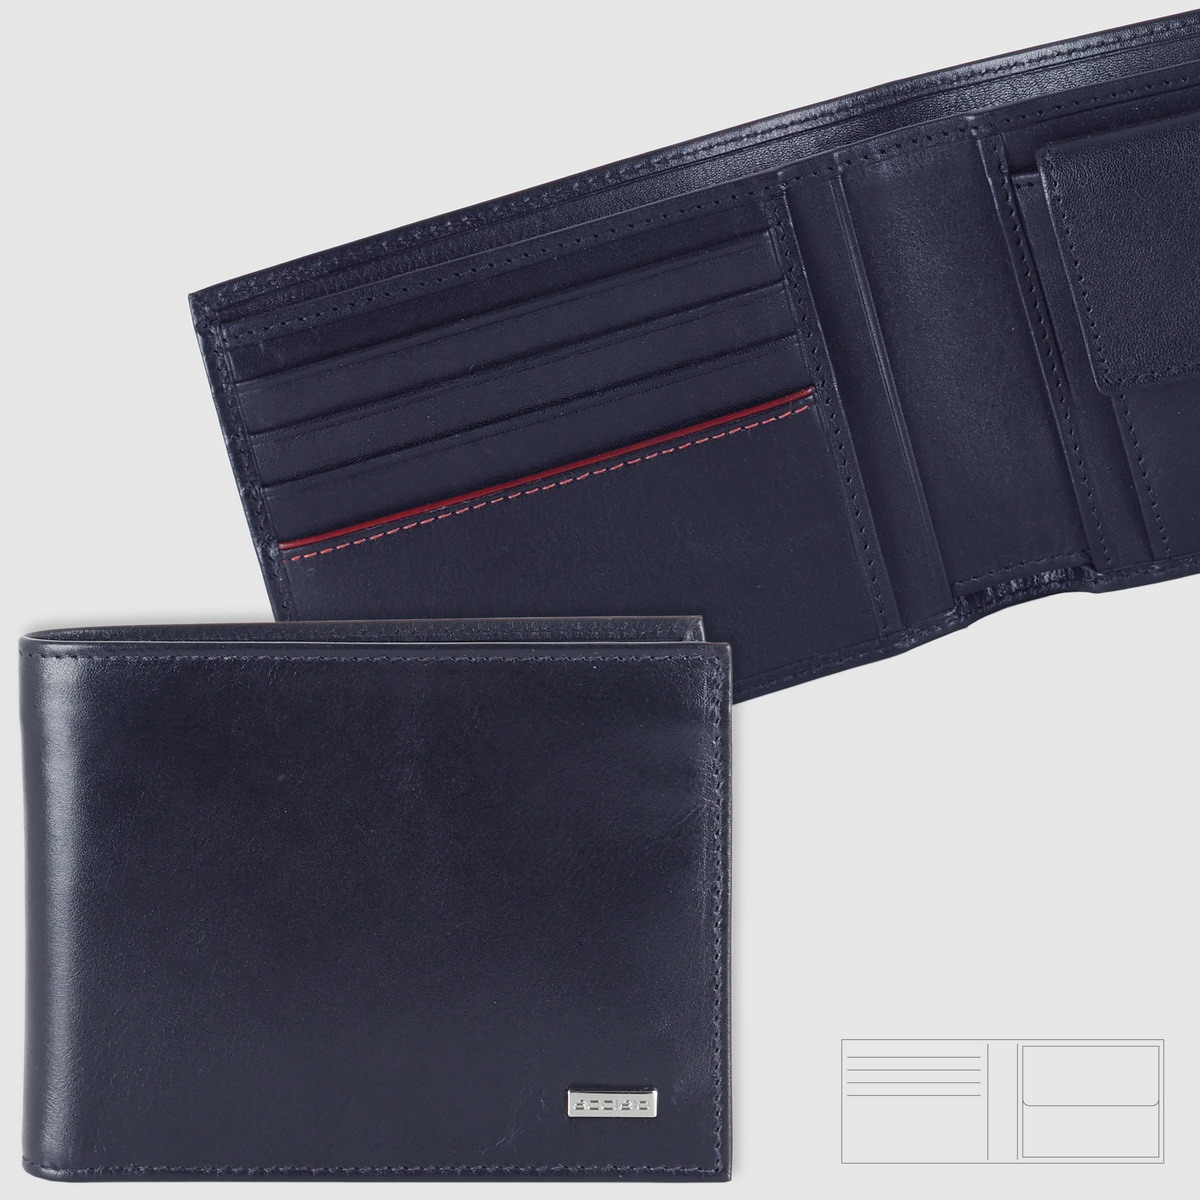 Man's leather wallet with coin pocket